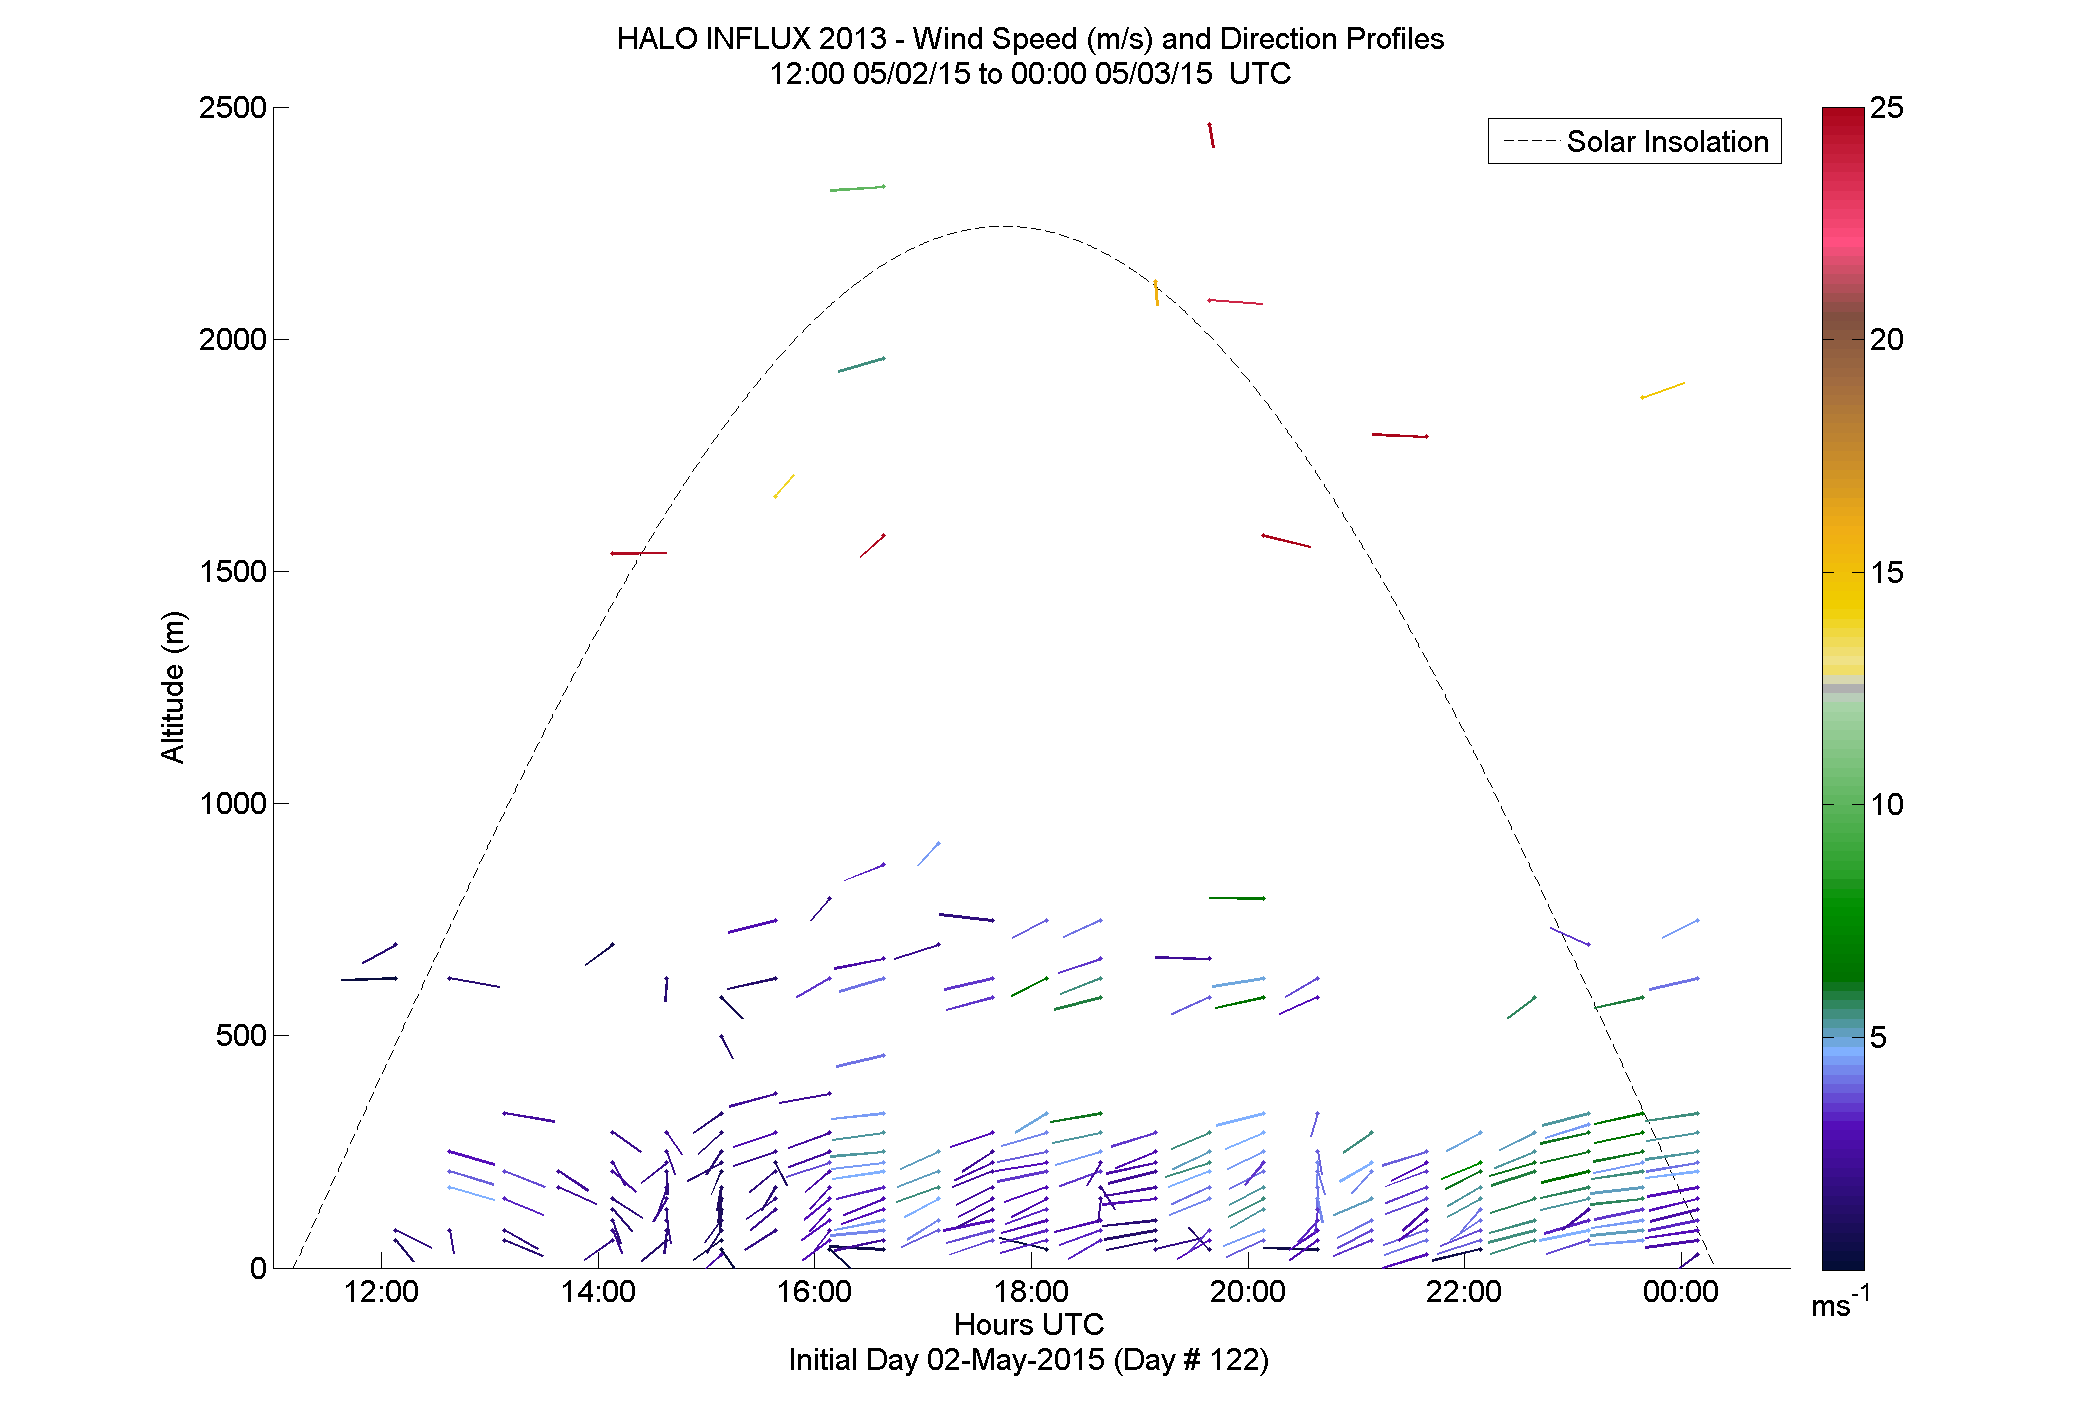 HALO speed and direction profile - May 2 pm